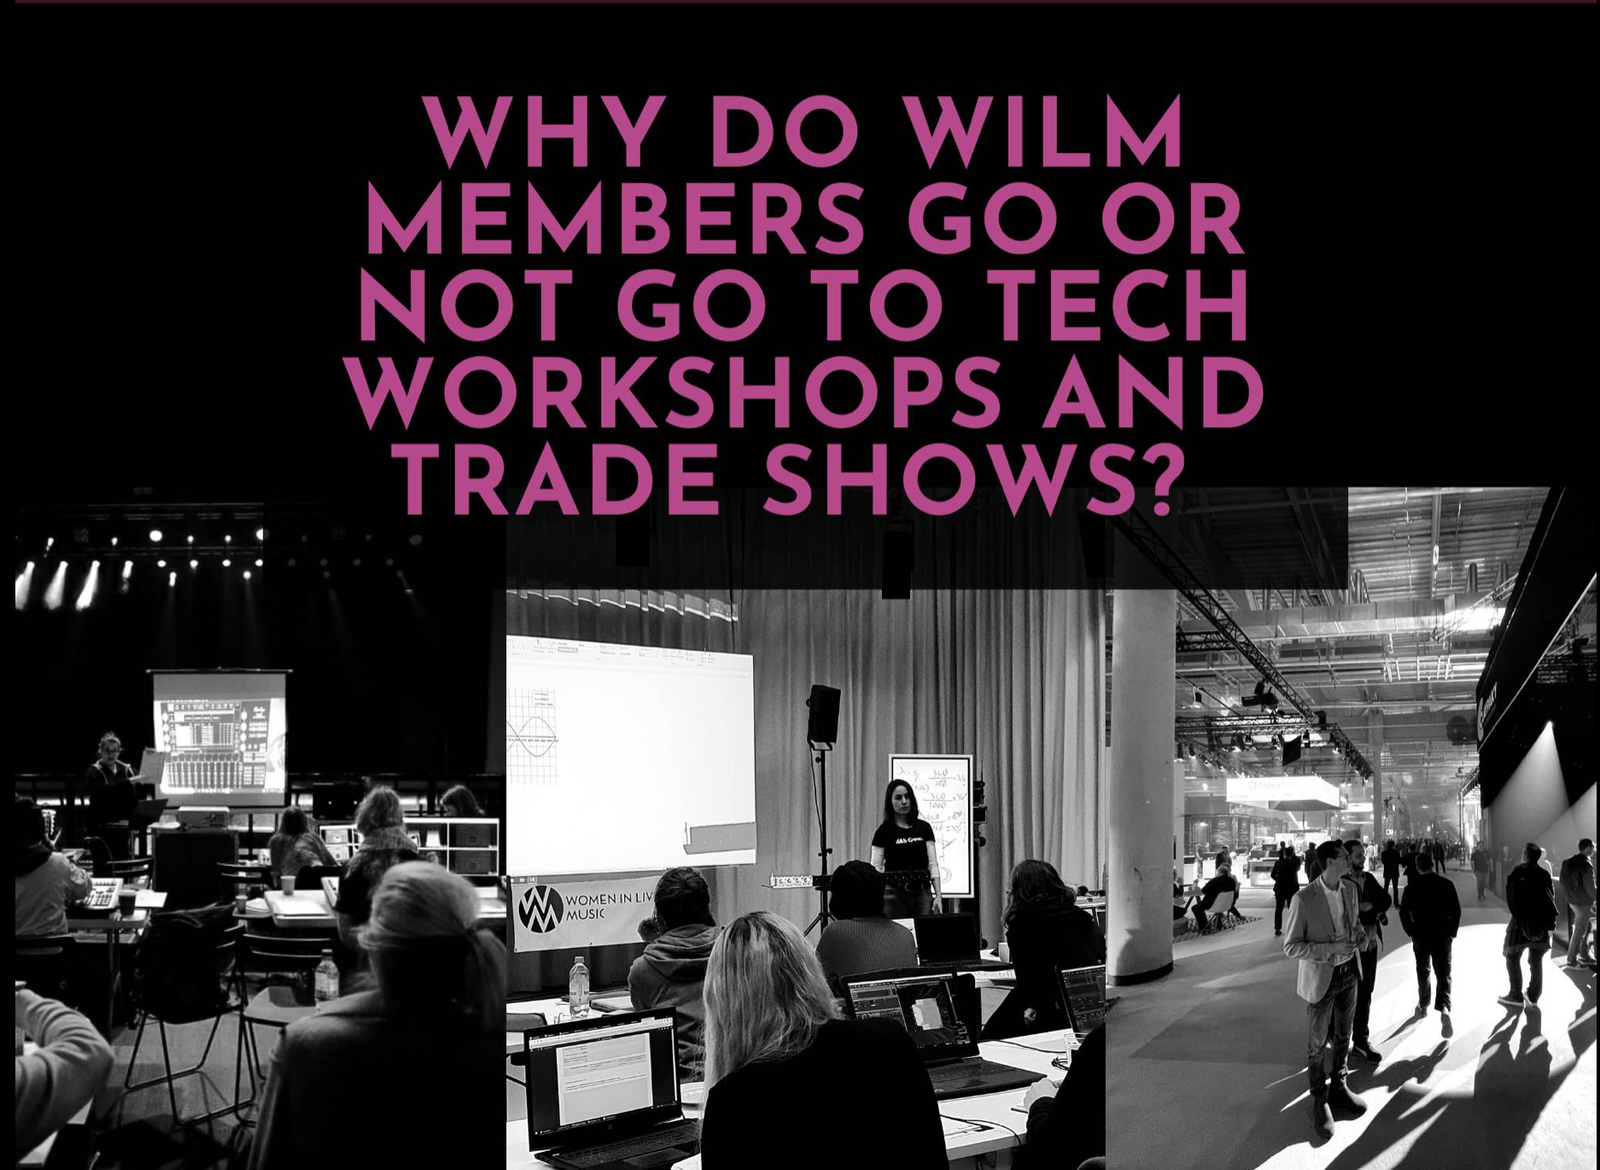 WILM Survey “Why do women go or not go to tech trade shows/workshops”